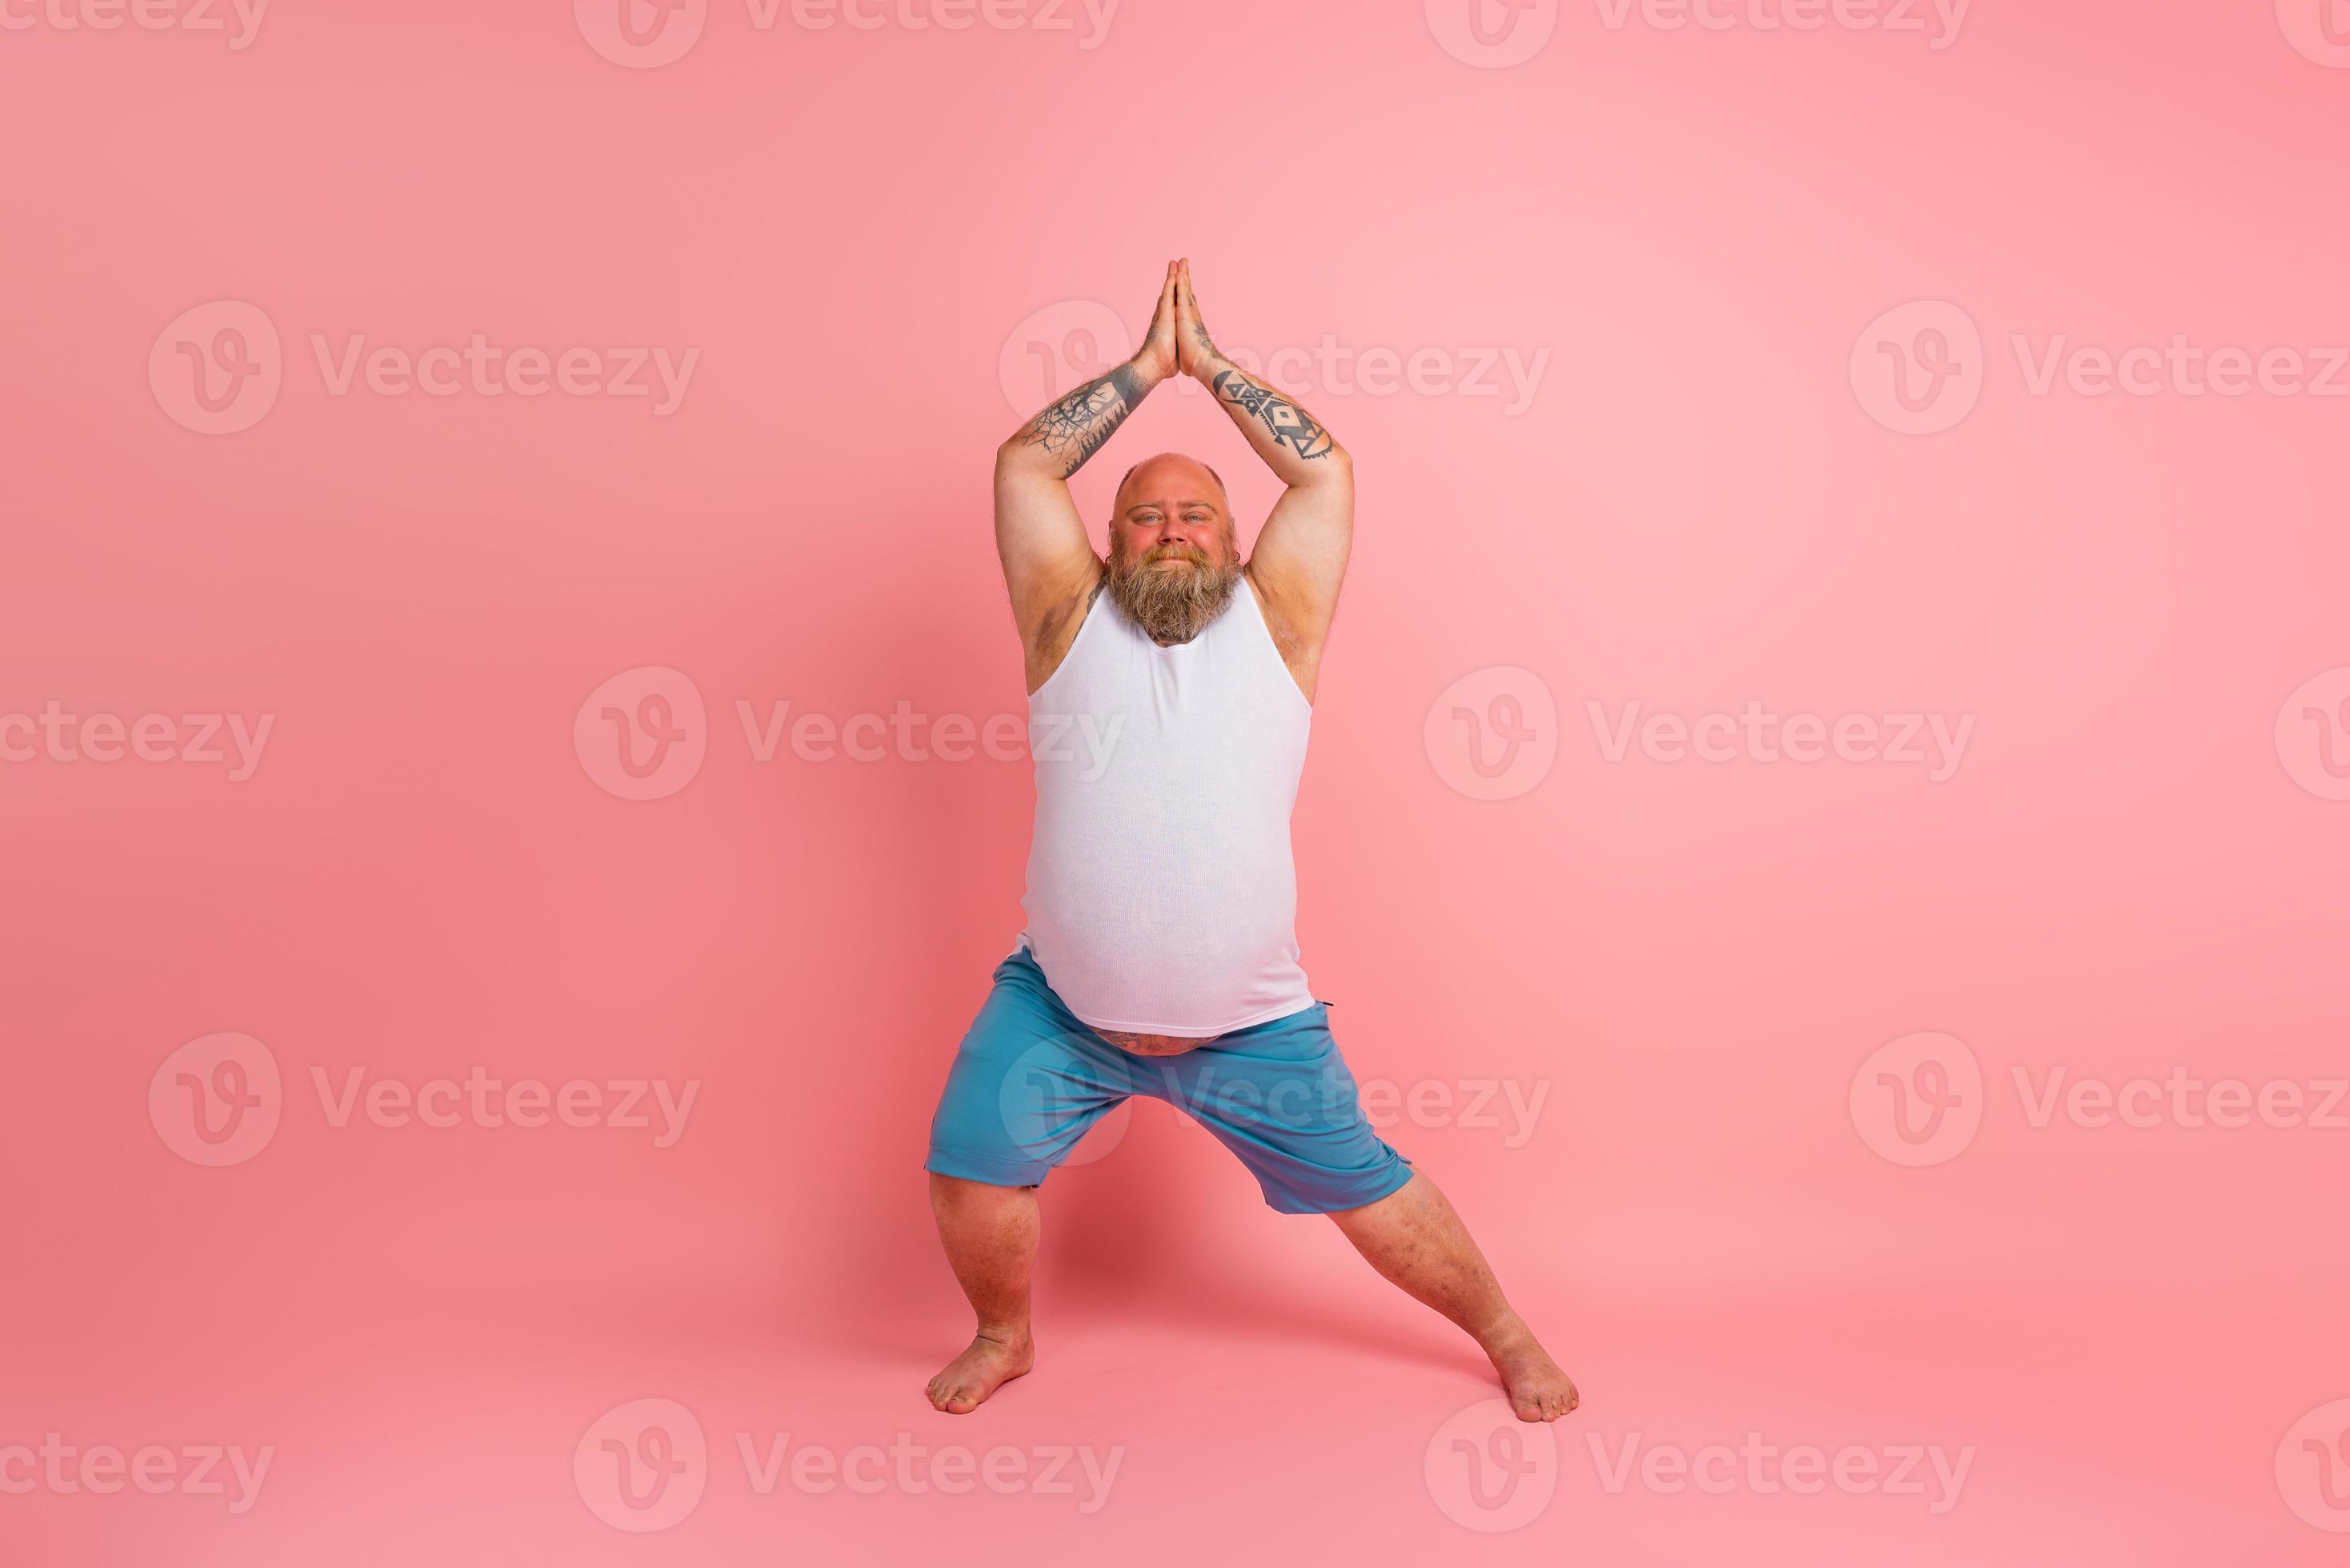 Funny man with beard in yoga position on studio pink background 20566262  Stock Photo at Vecteezy